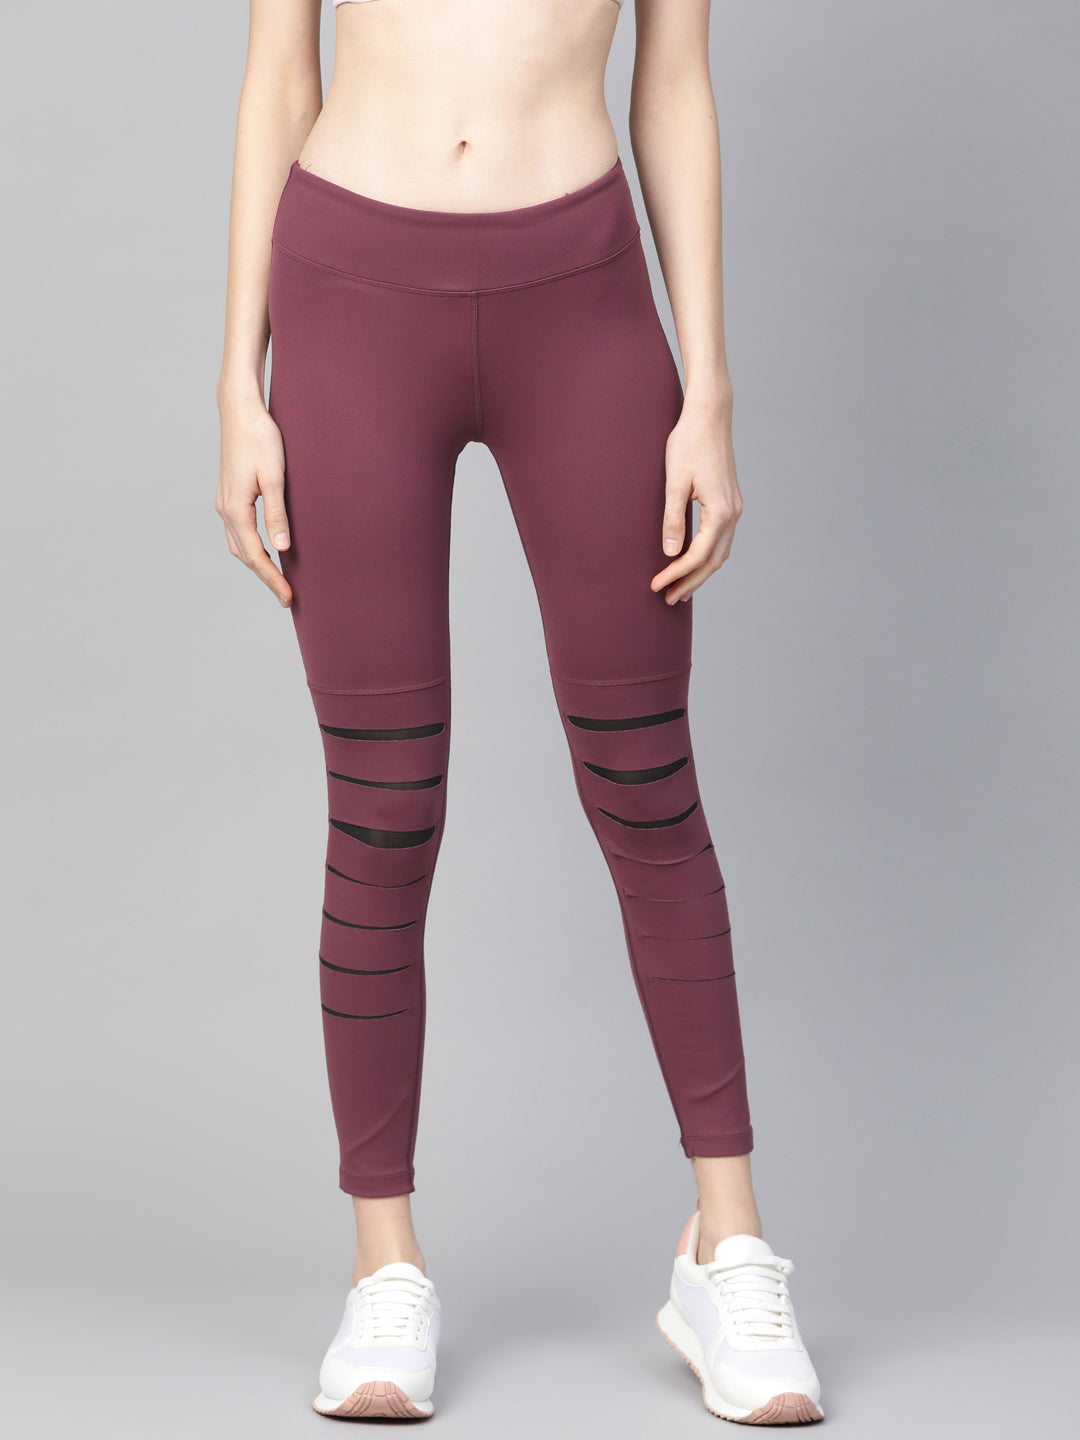 Women's Burgundy Solid Ripped Tights